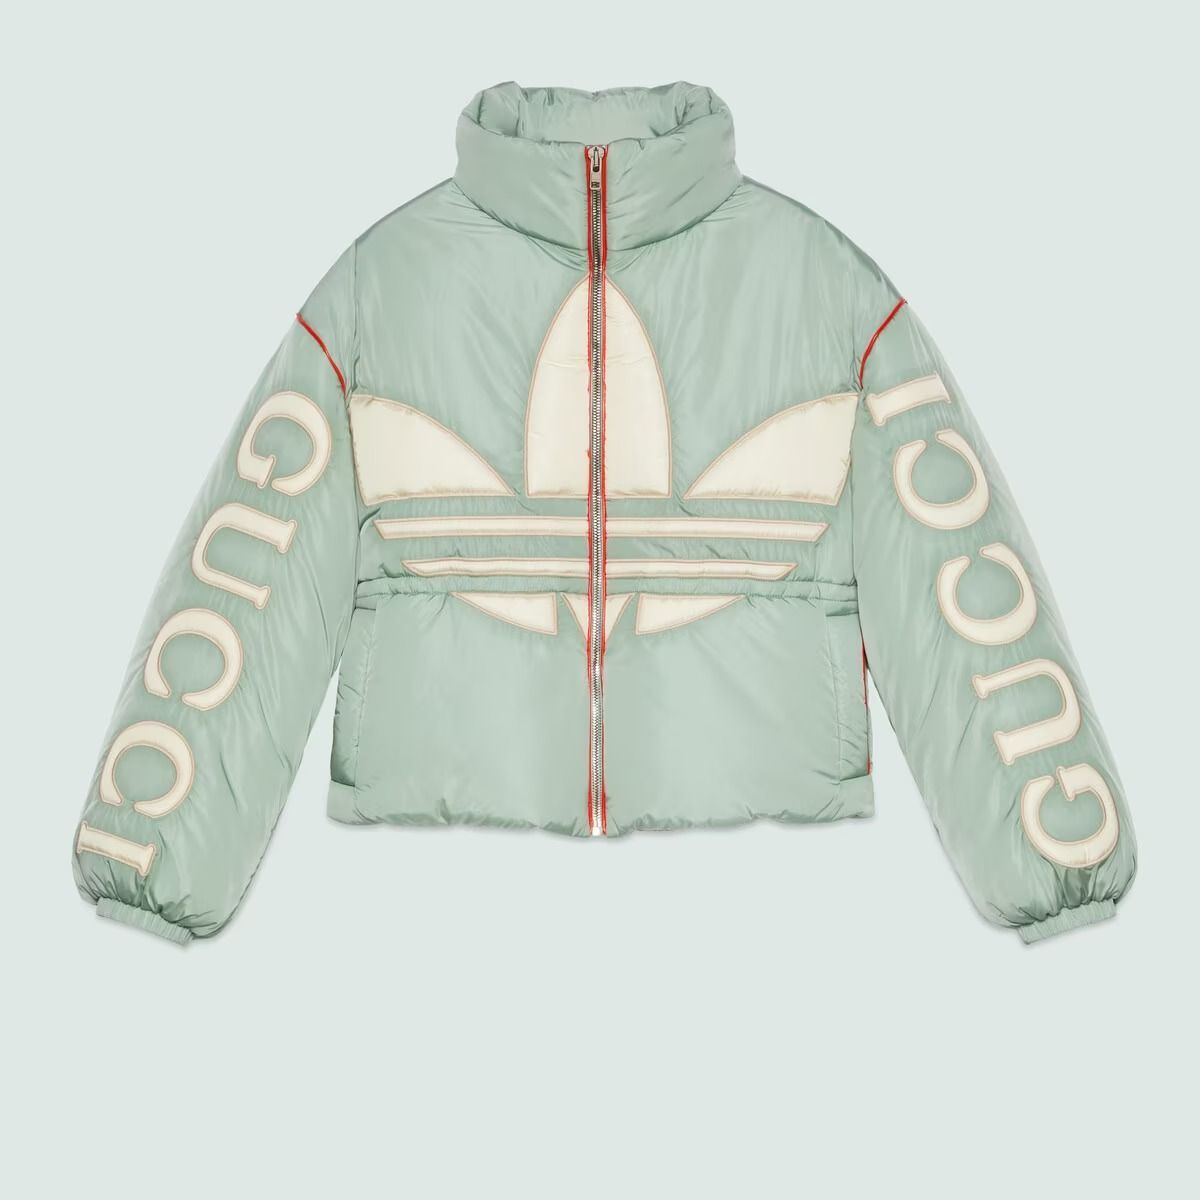 Gucci x Adidas: Shop the Second Drop of the Iconic Collaboration